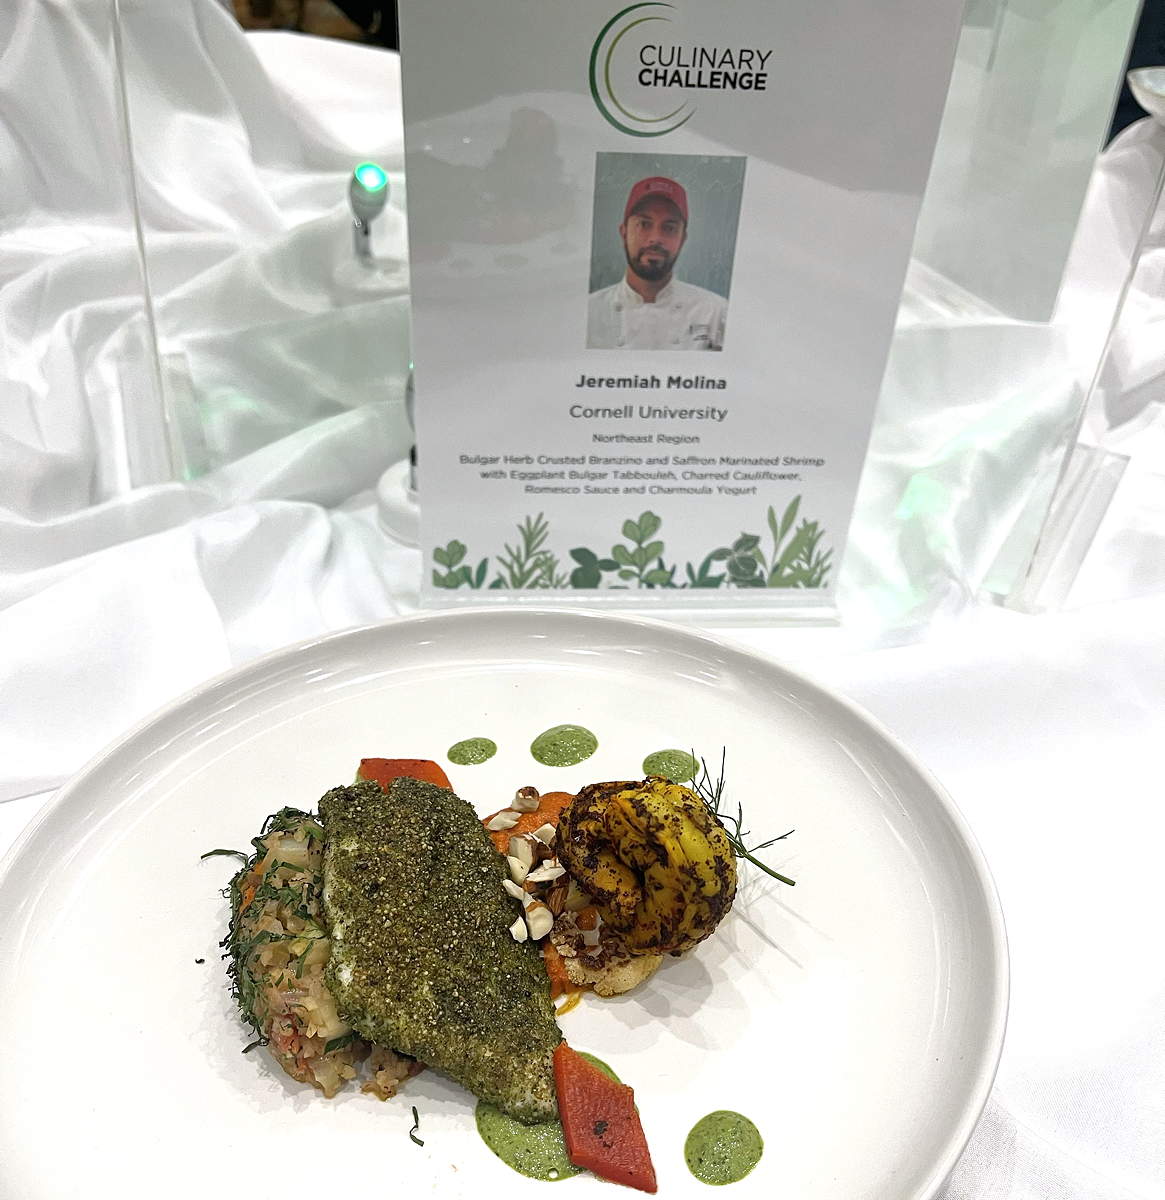 A plate of food with a placard identifying Jeremiah Molina of Cornell as the chef